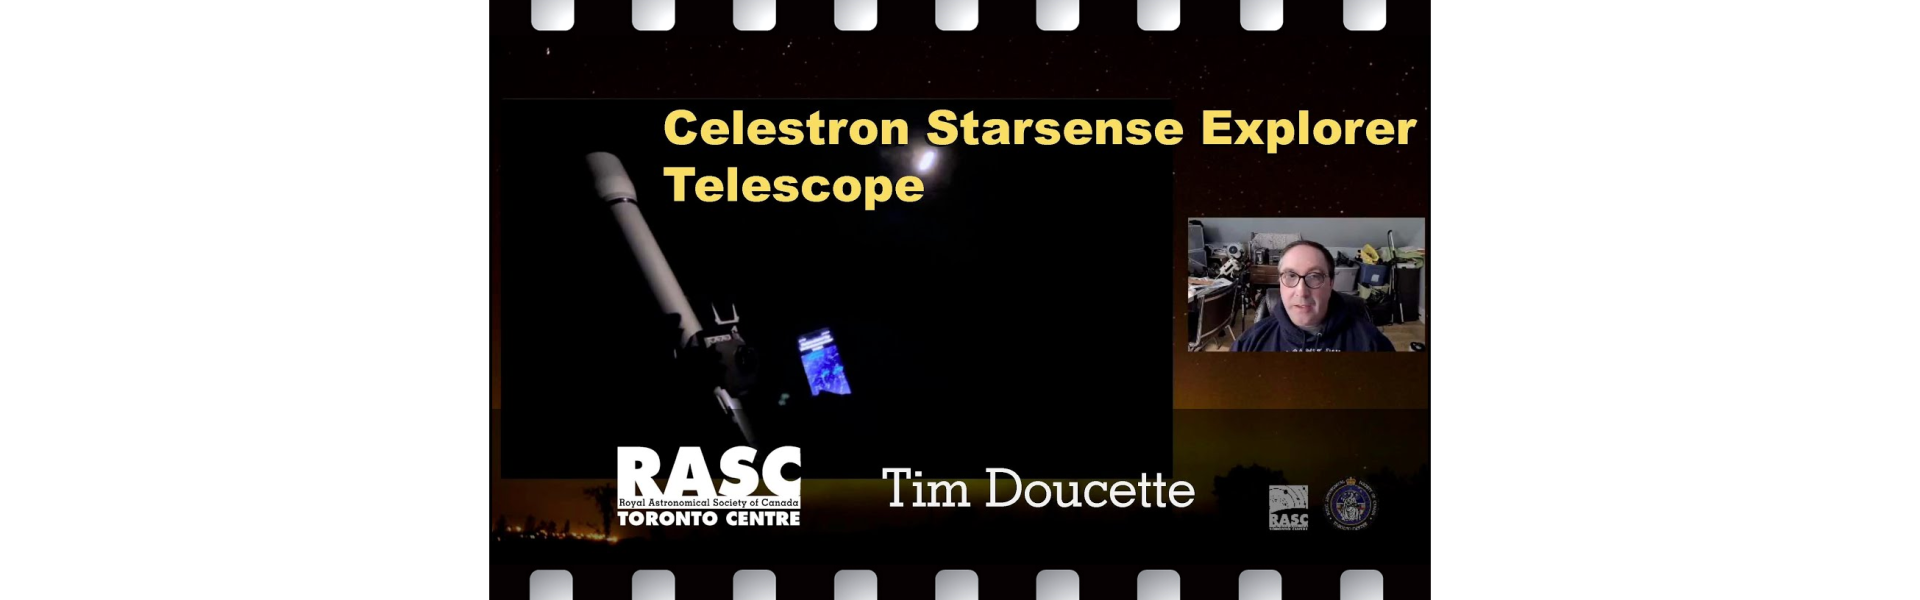 Celestron Starsense Explorer Telescope Review and a Tour of the Deep Sky Eye Observatory